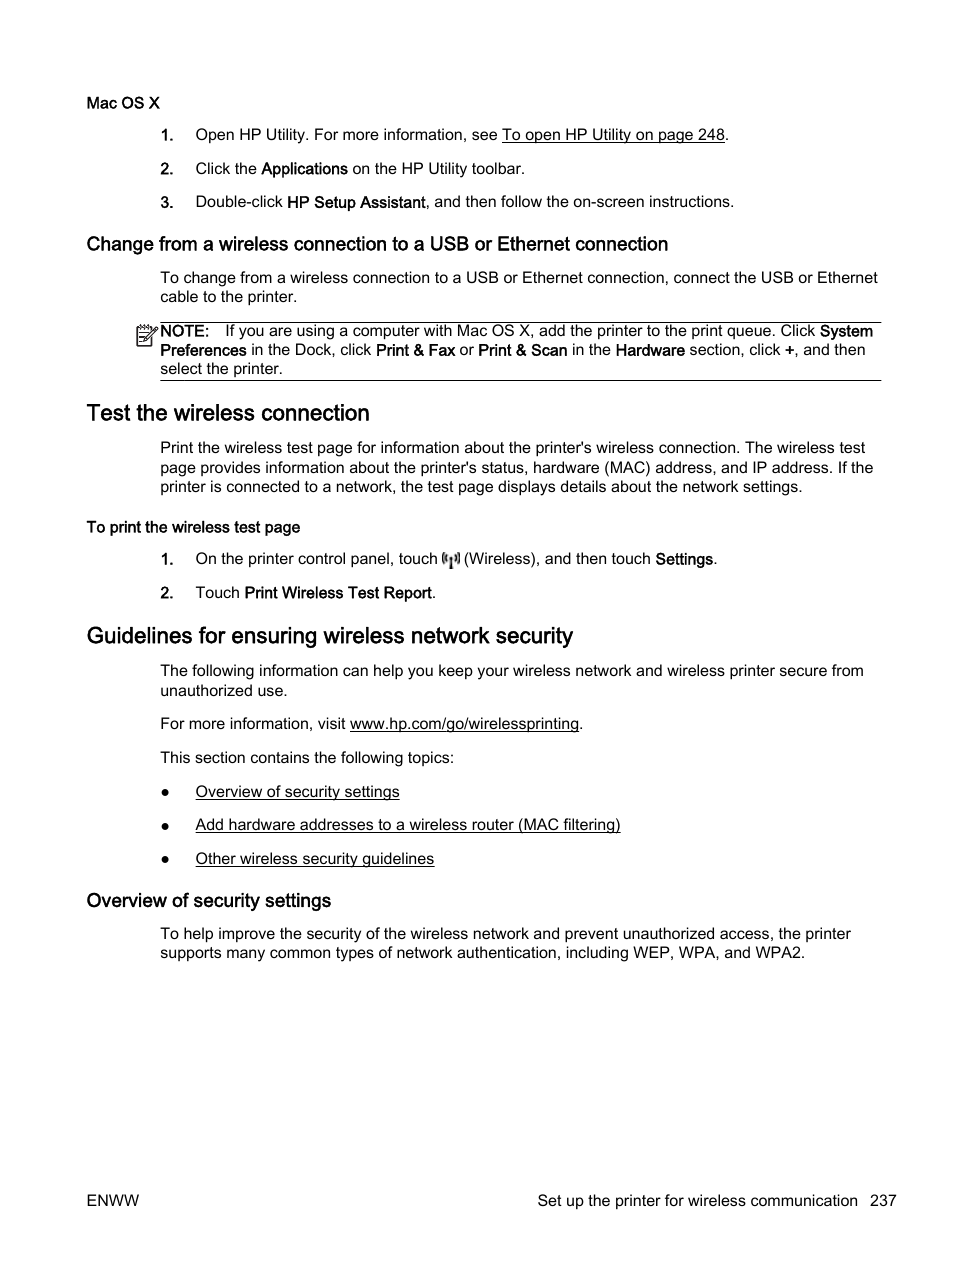 Test the wireless connection, Guidelines for ensuring wireless network